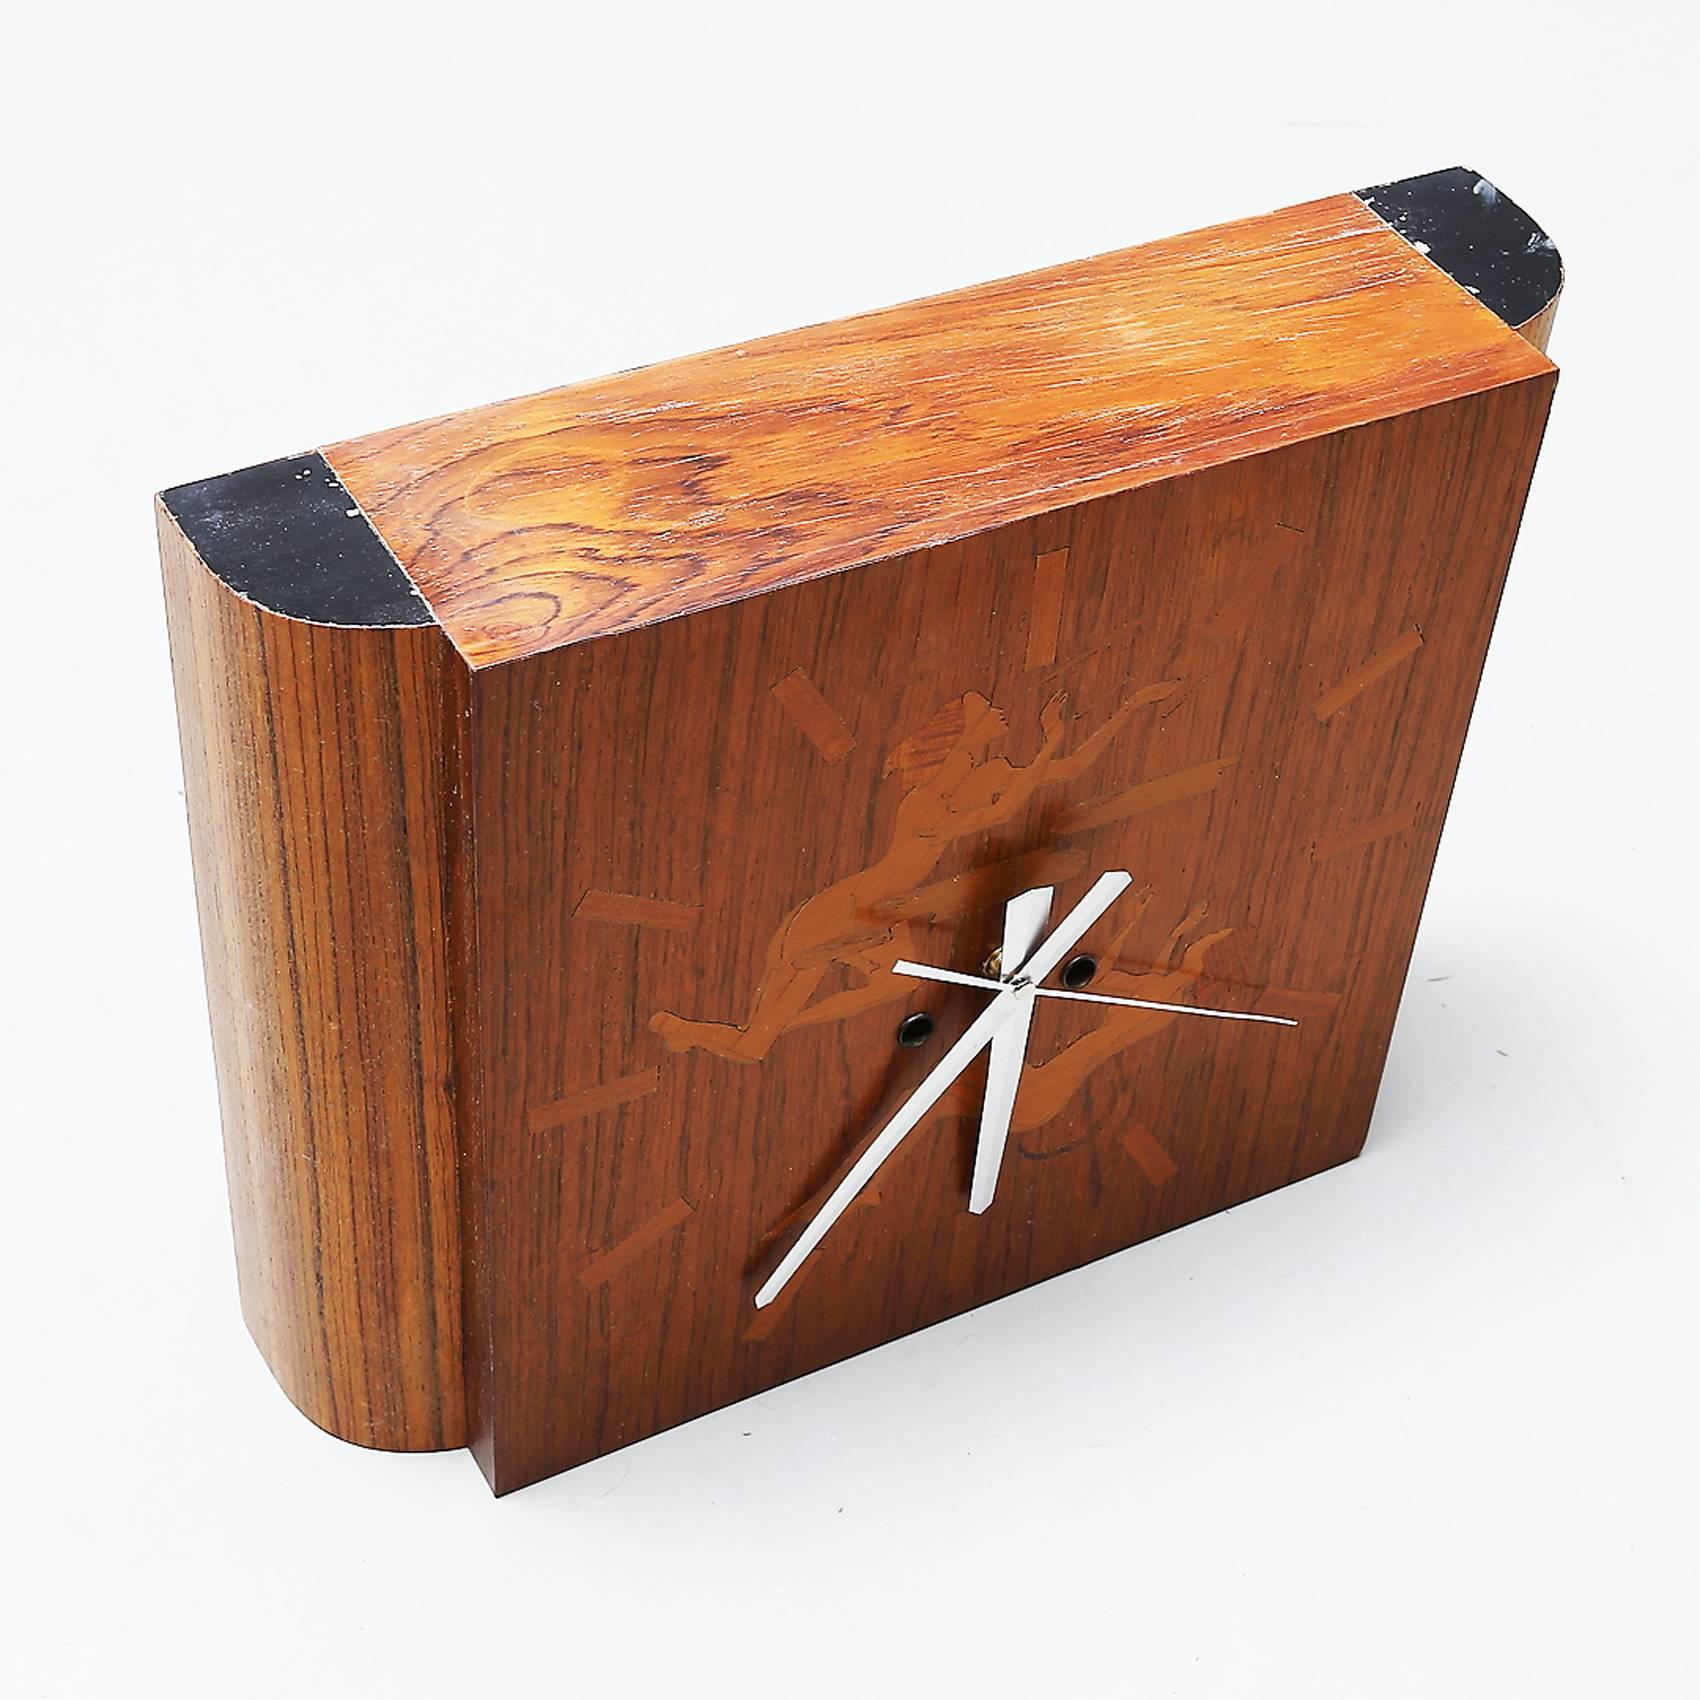 An original handcrafted inlaid Swedish wall clock attributed to Mjolby Intarsia. New battery movement.